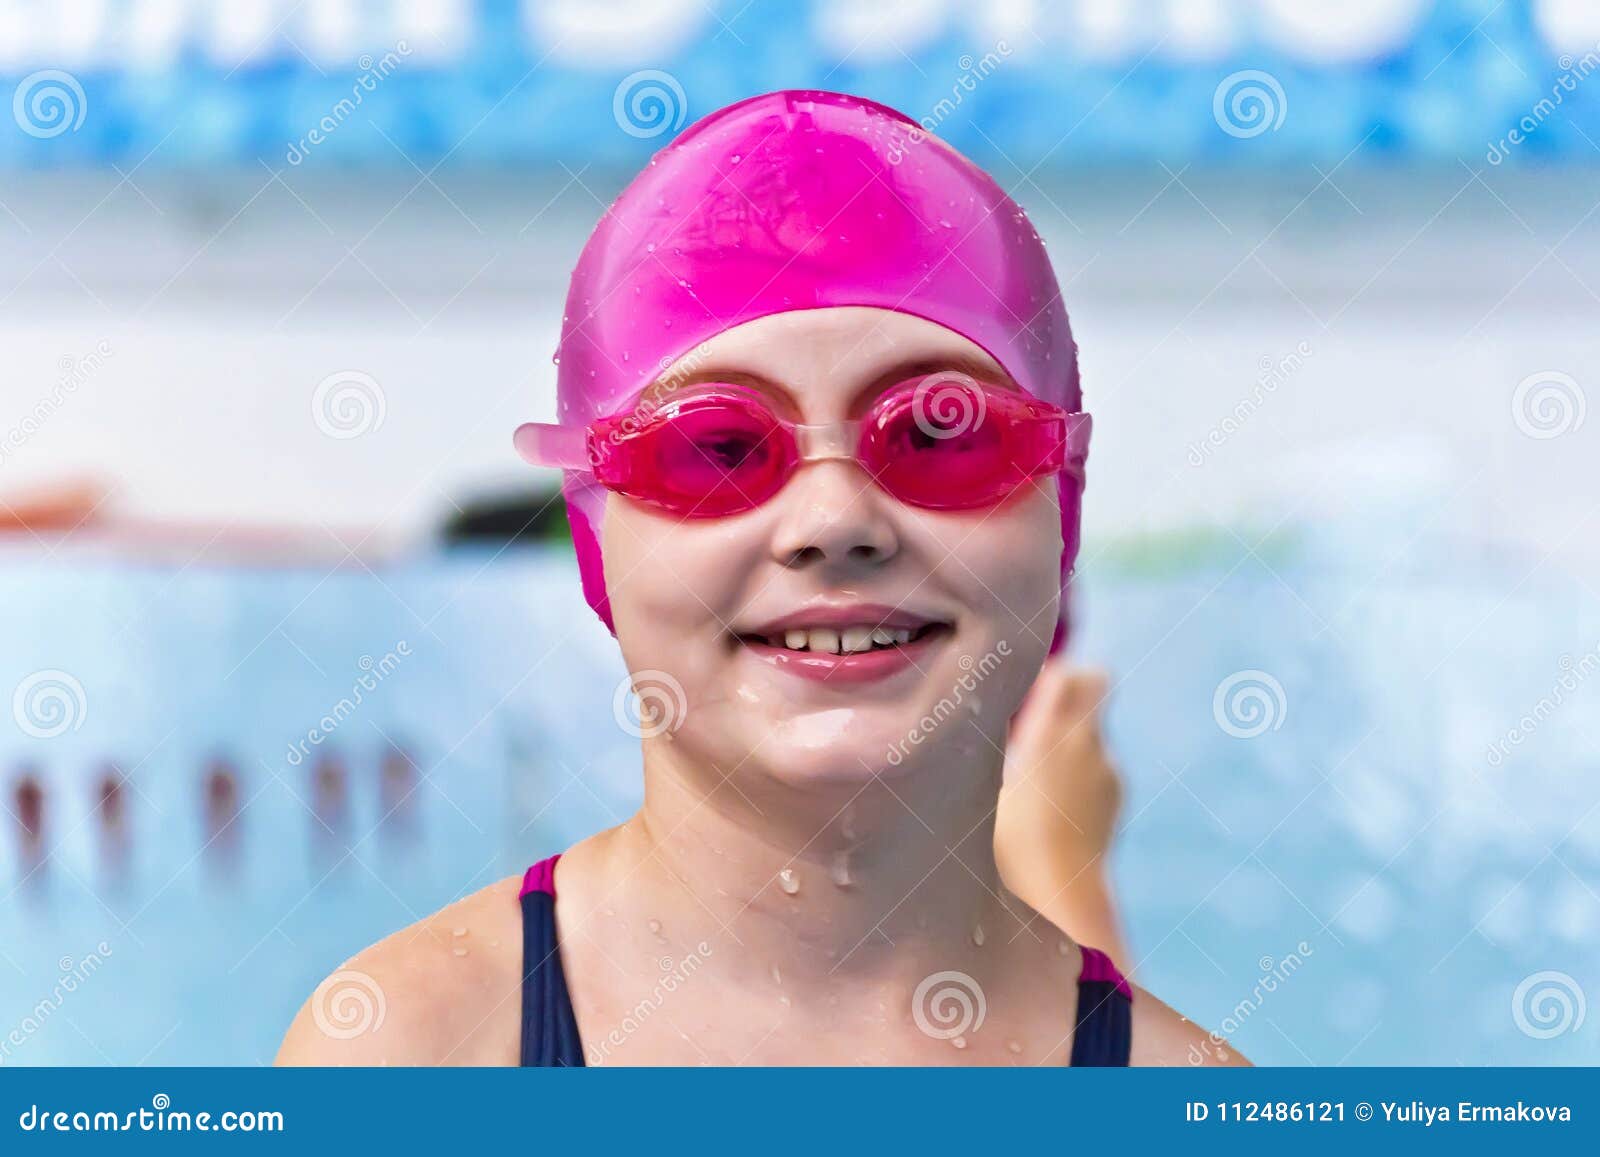 Girl in pink rubber hat stock image. Image of swimming - 112486121